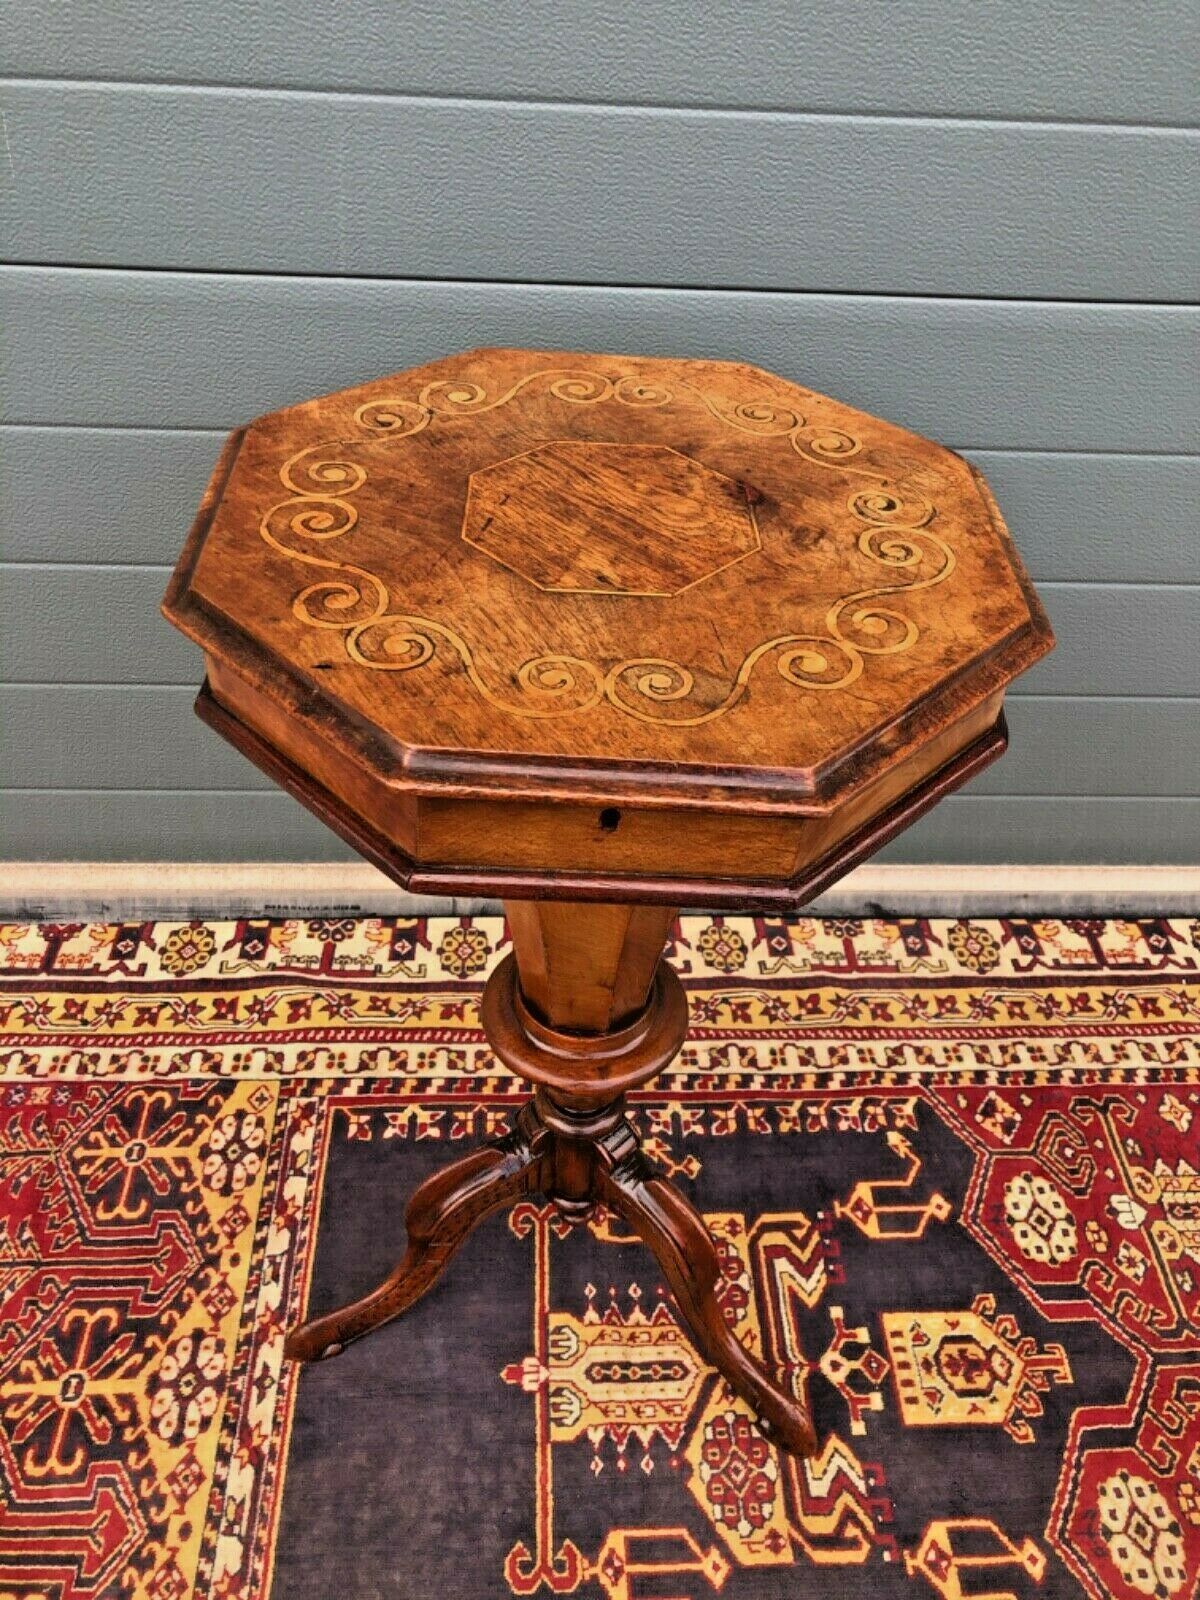 Victorian Inlaid Trumpet Sewing Table / Antique Hexagonal Sewing Box ( SOLD )